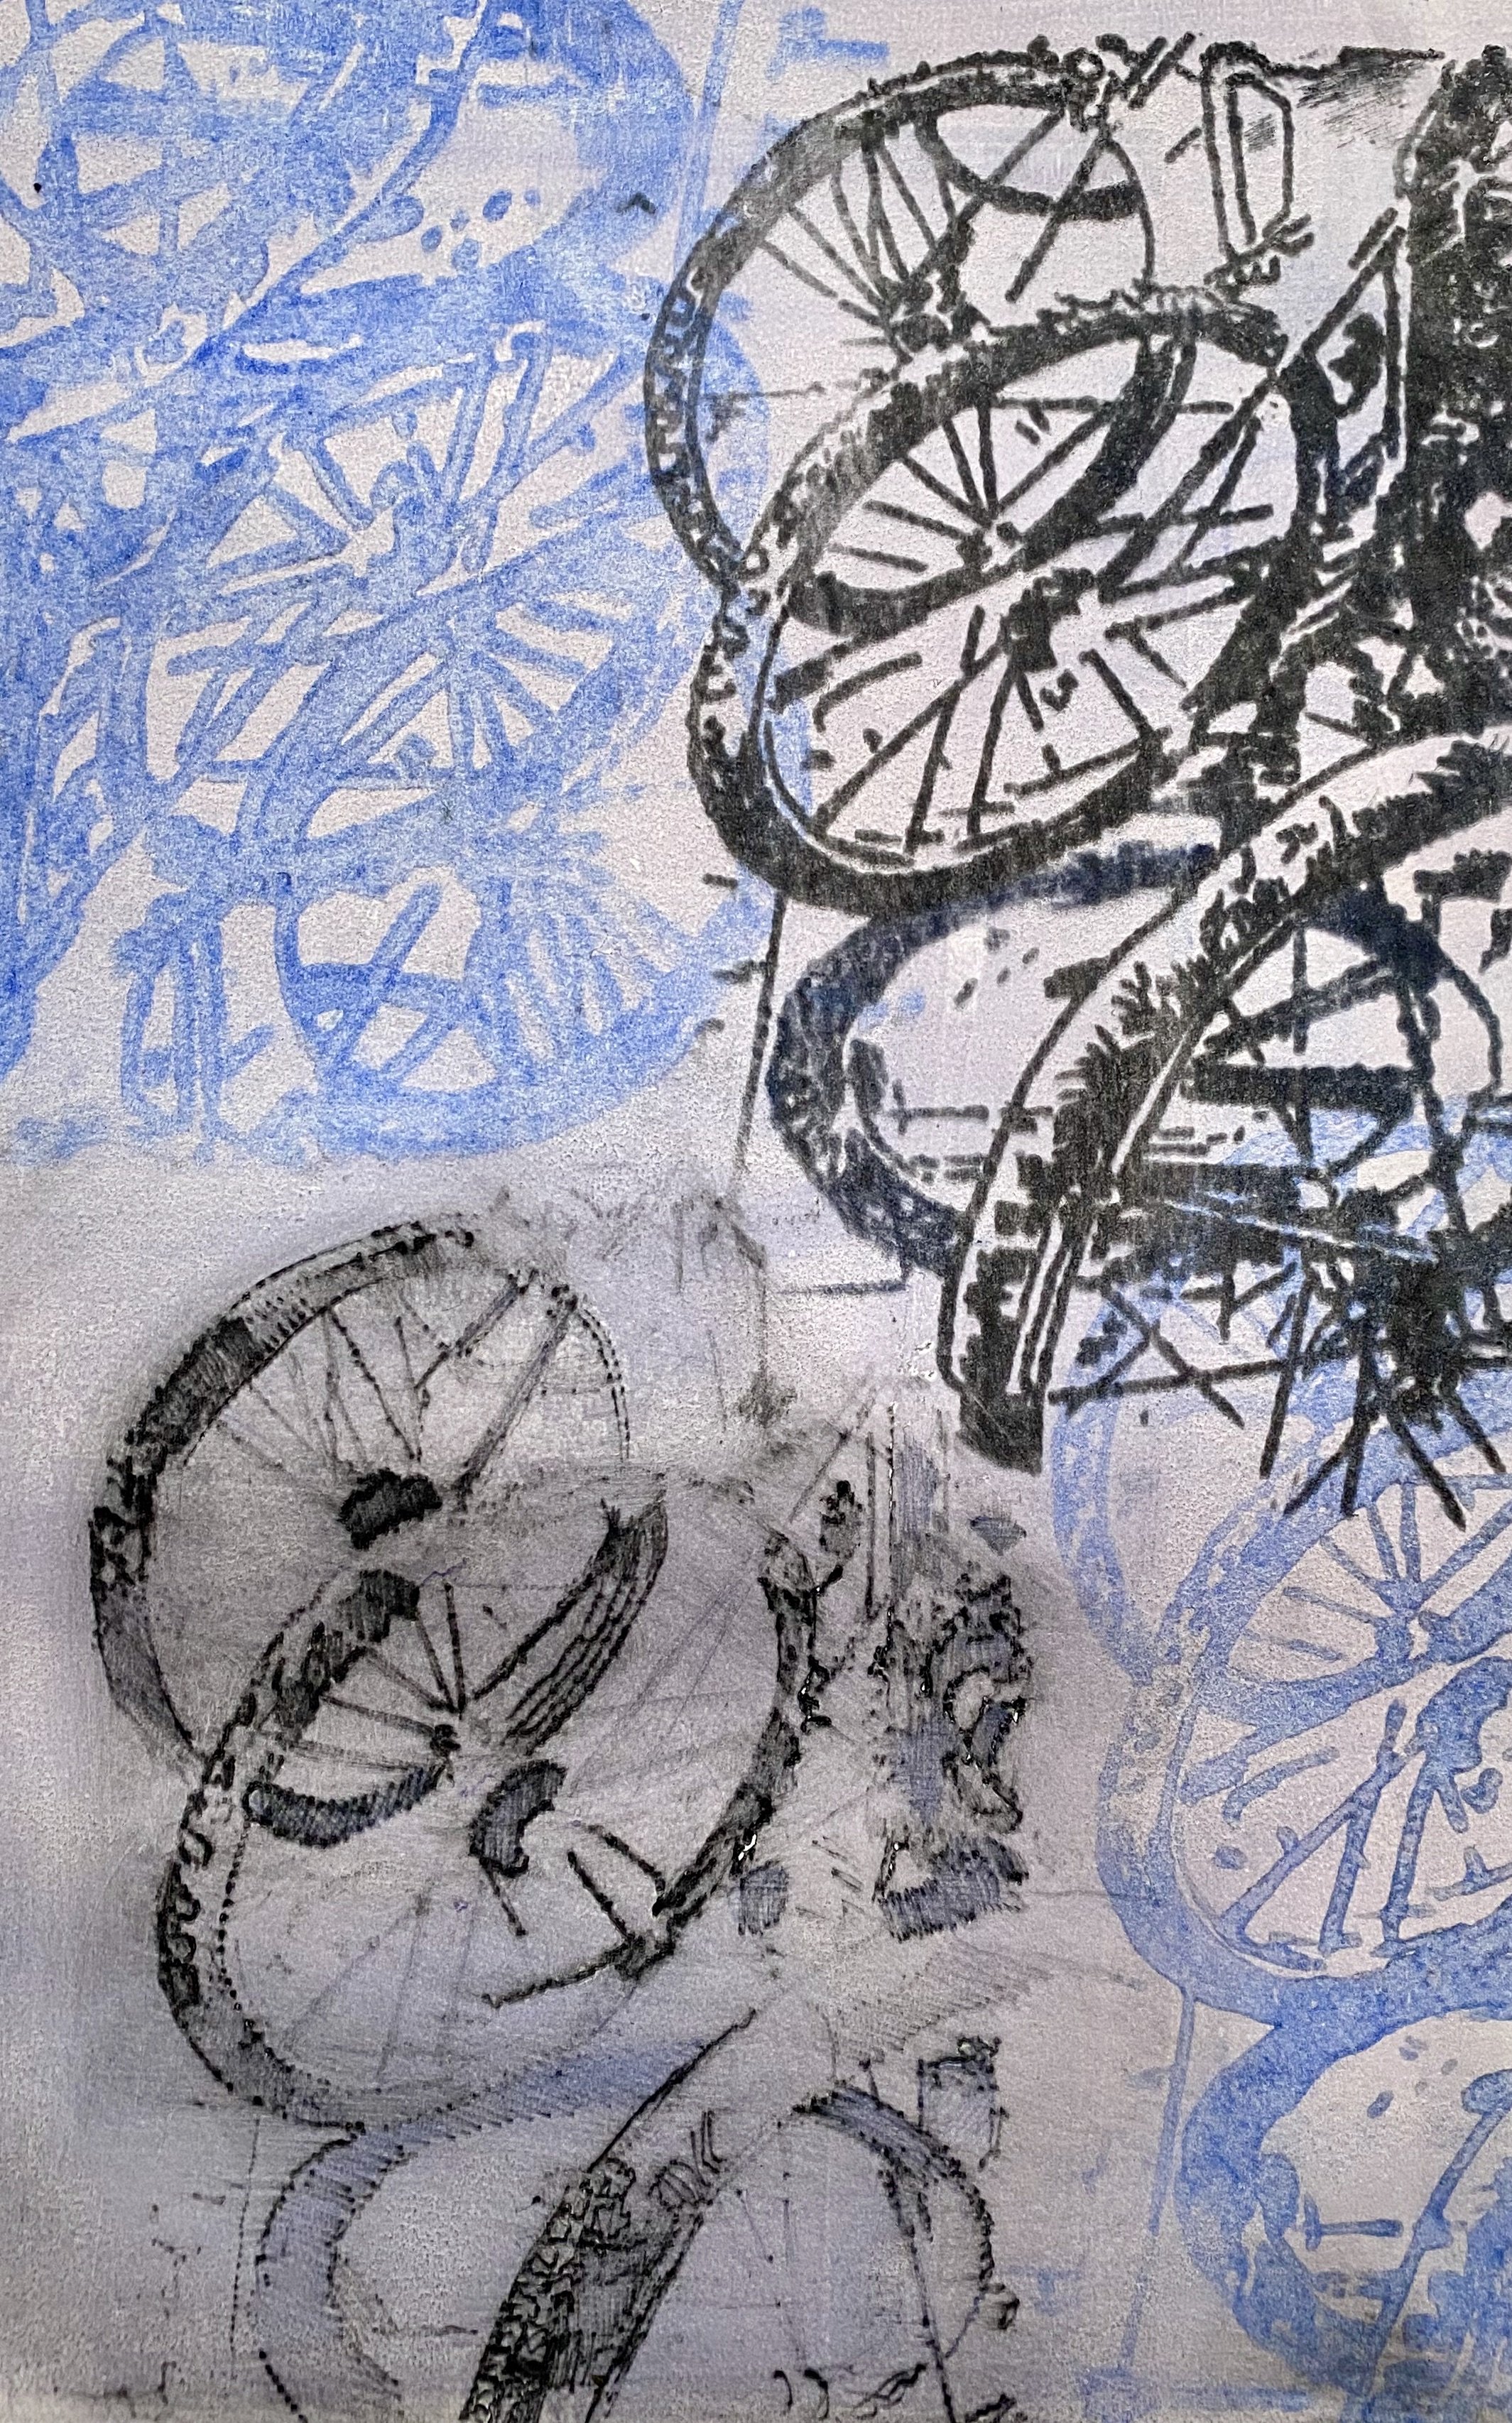 Bike rack, (1/1) 12 x 18", Lithograph/dry point, oil.